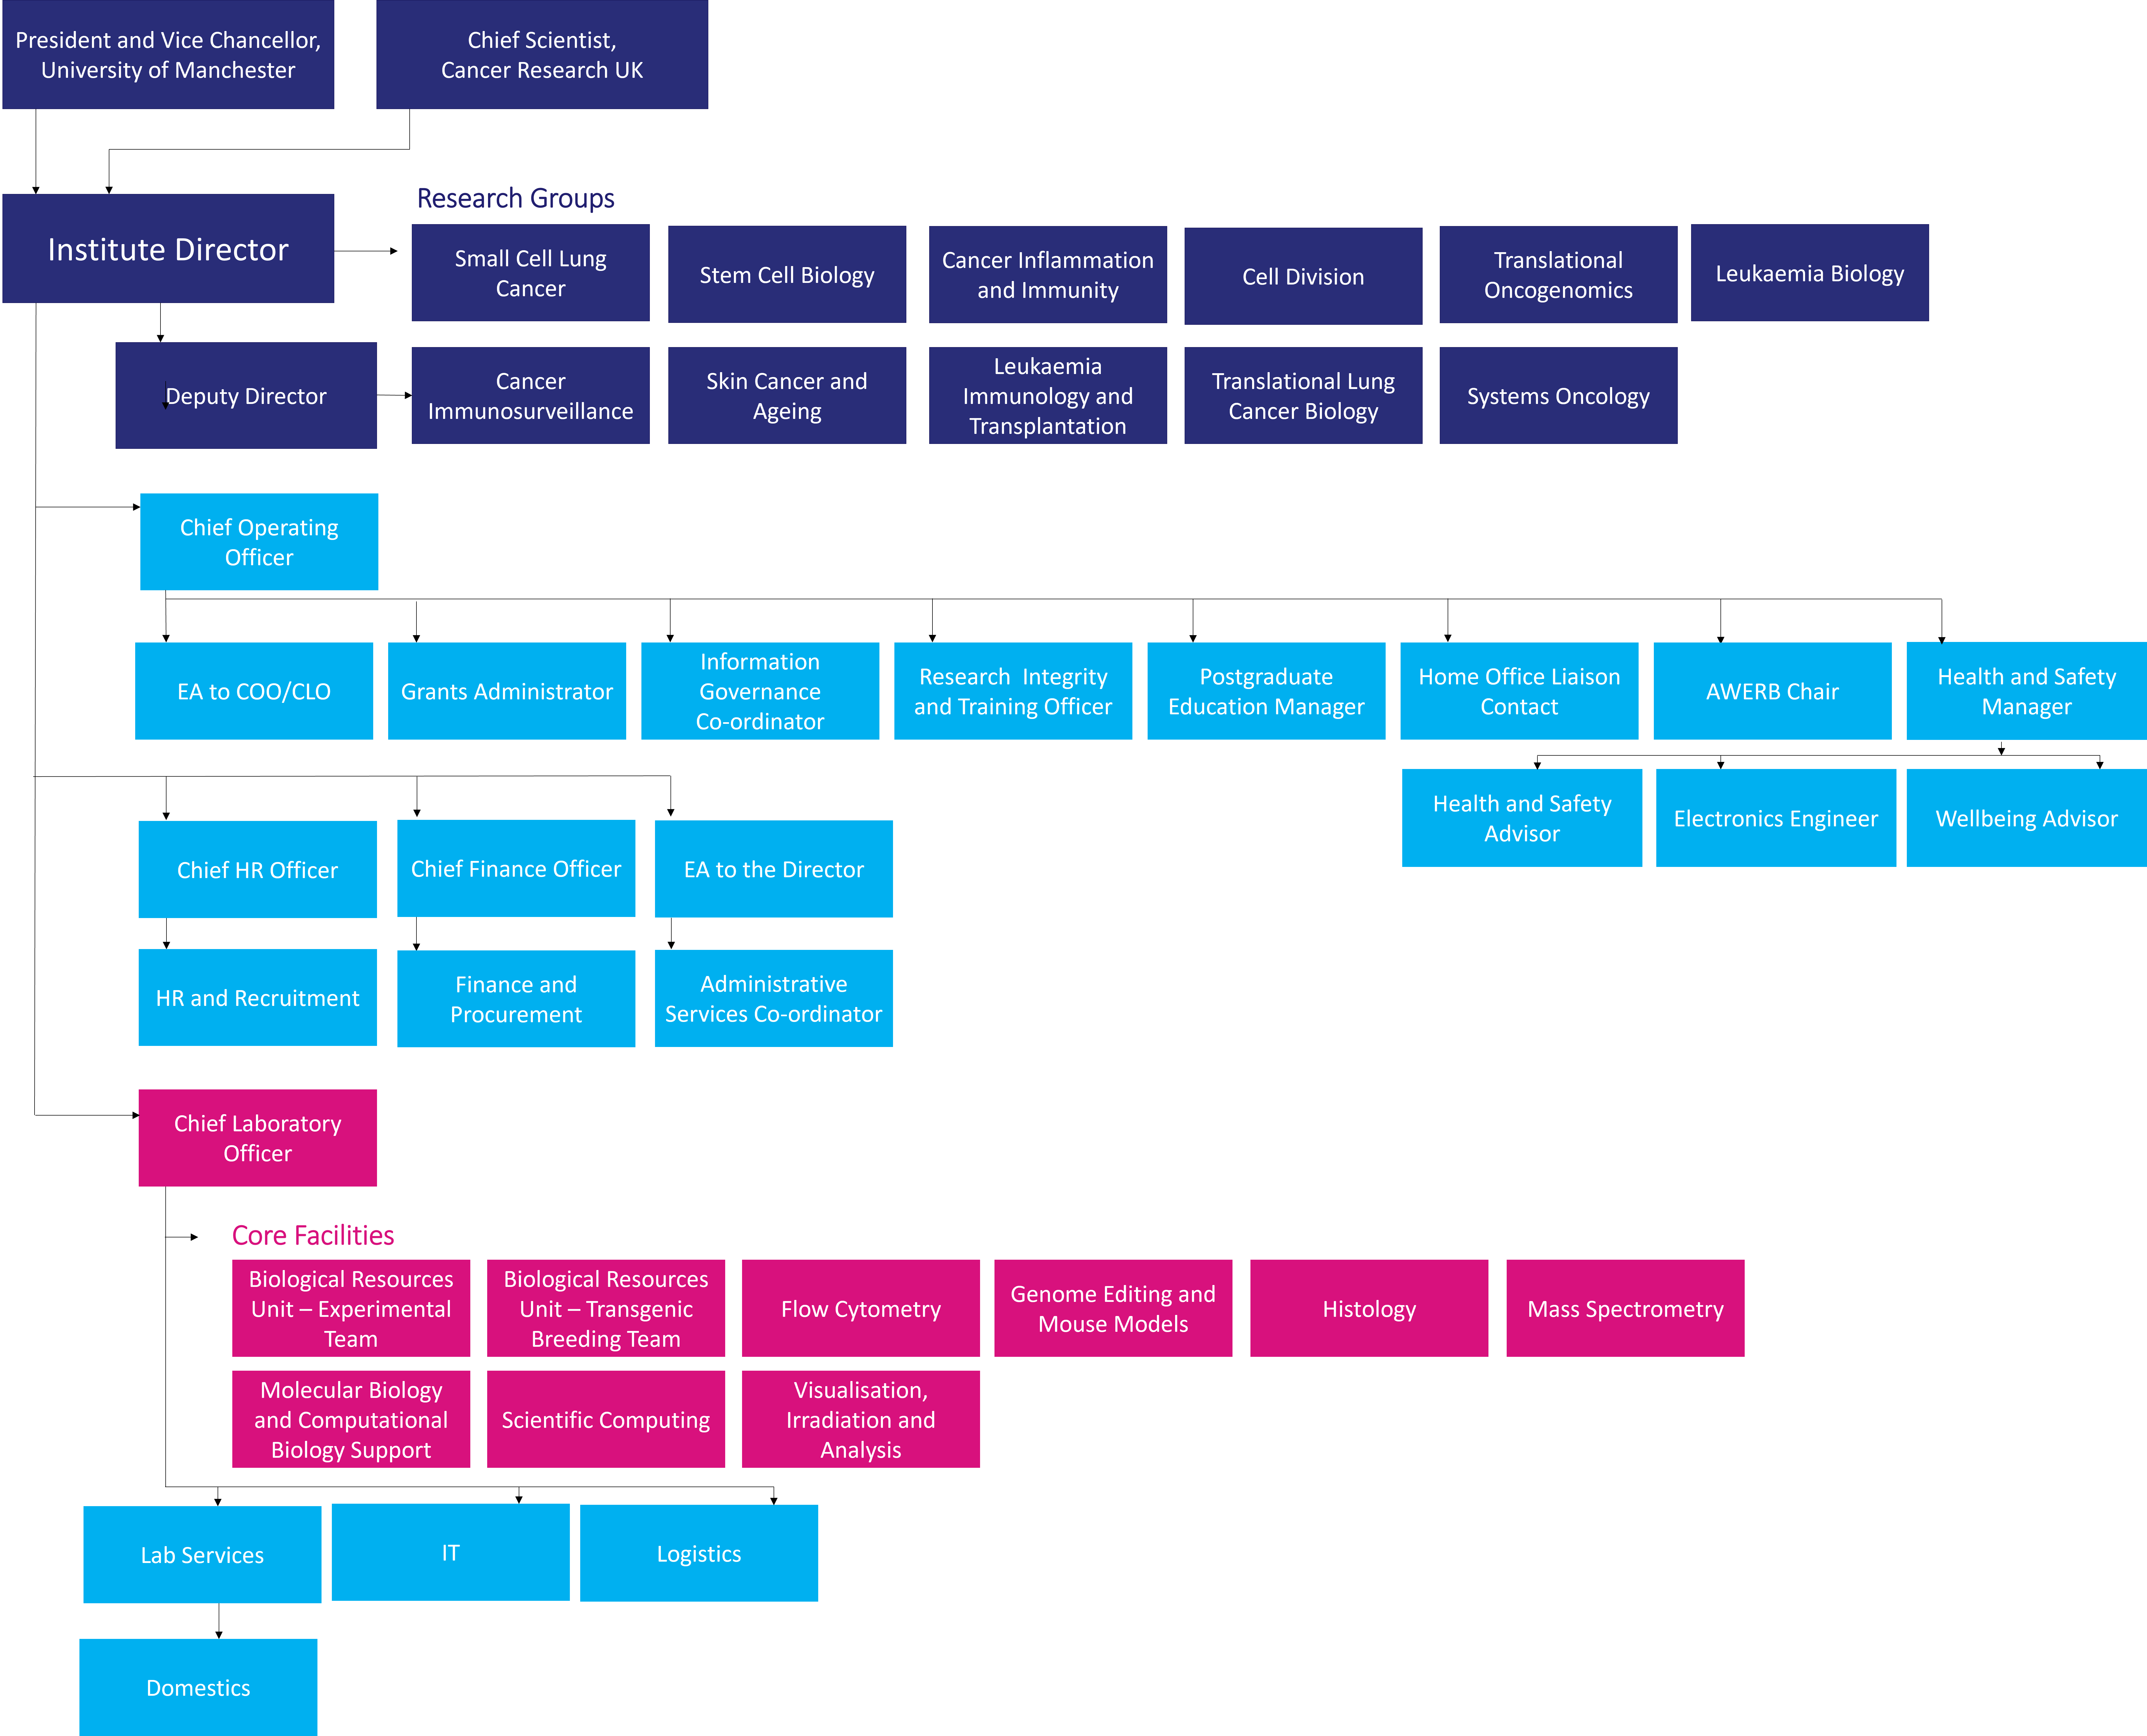 image of organisational structure of the institute